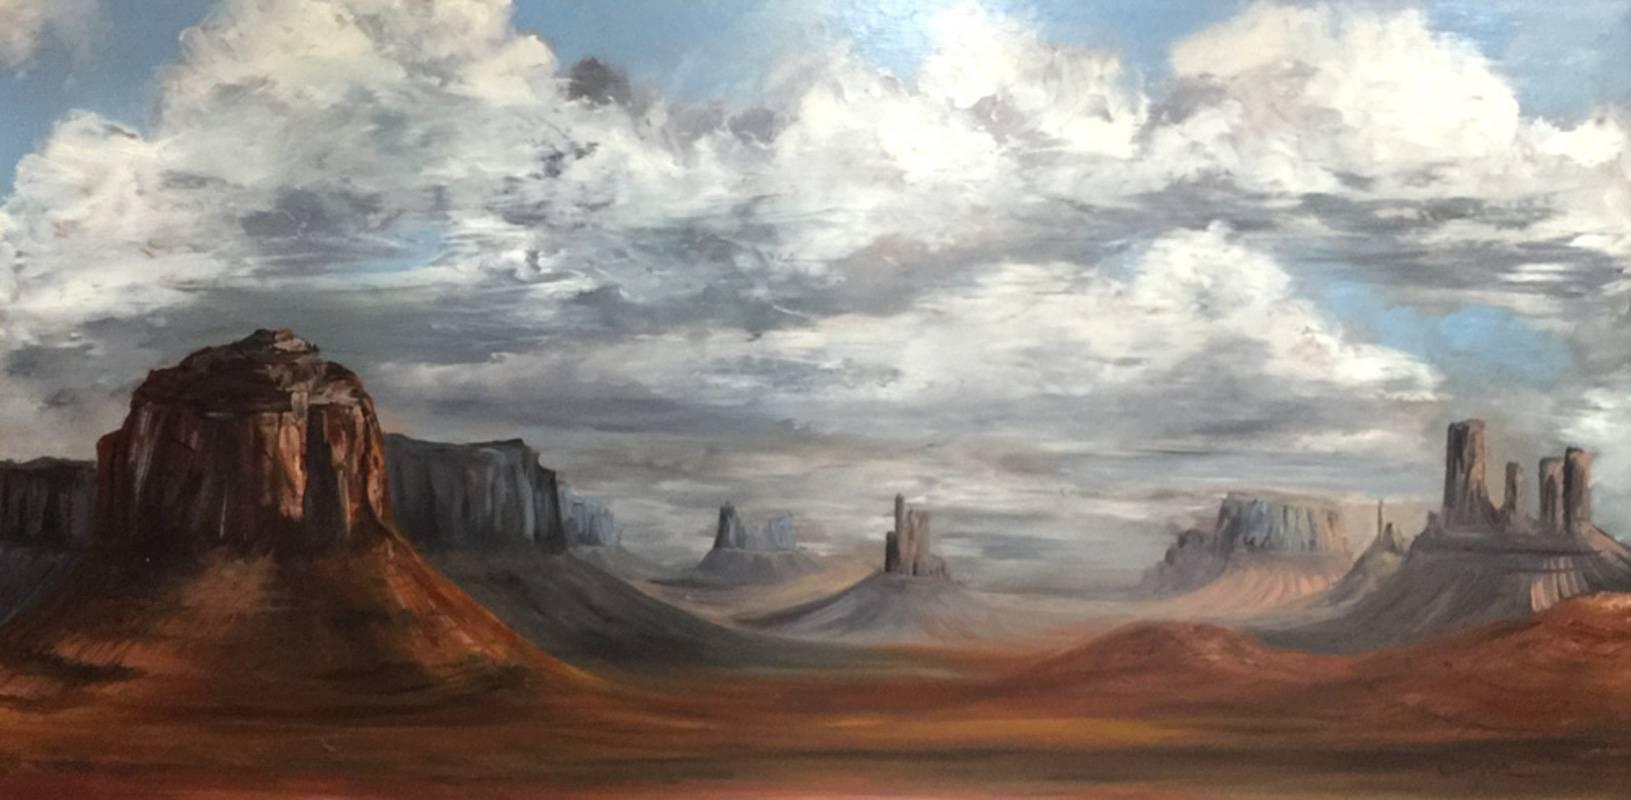 Ann Carlyon Landscape Painting - "Monument Valley" 